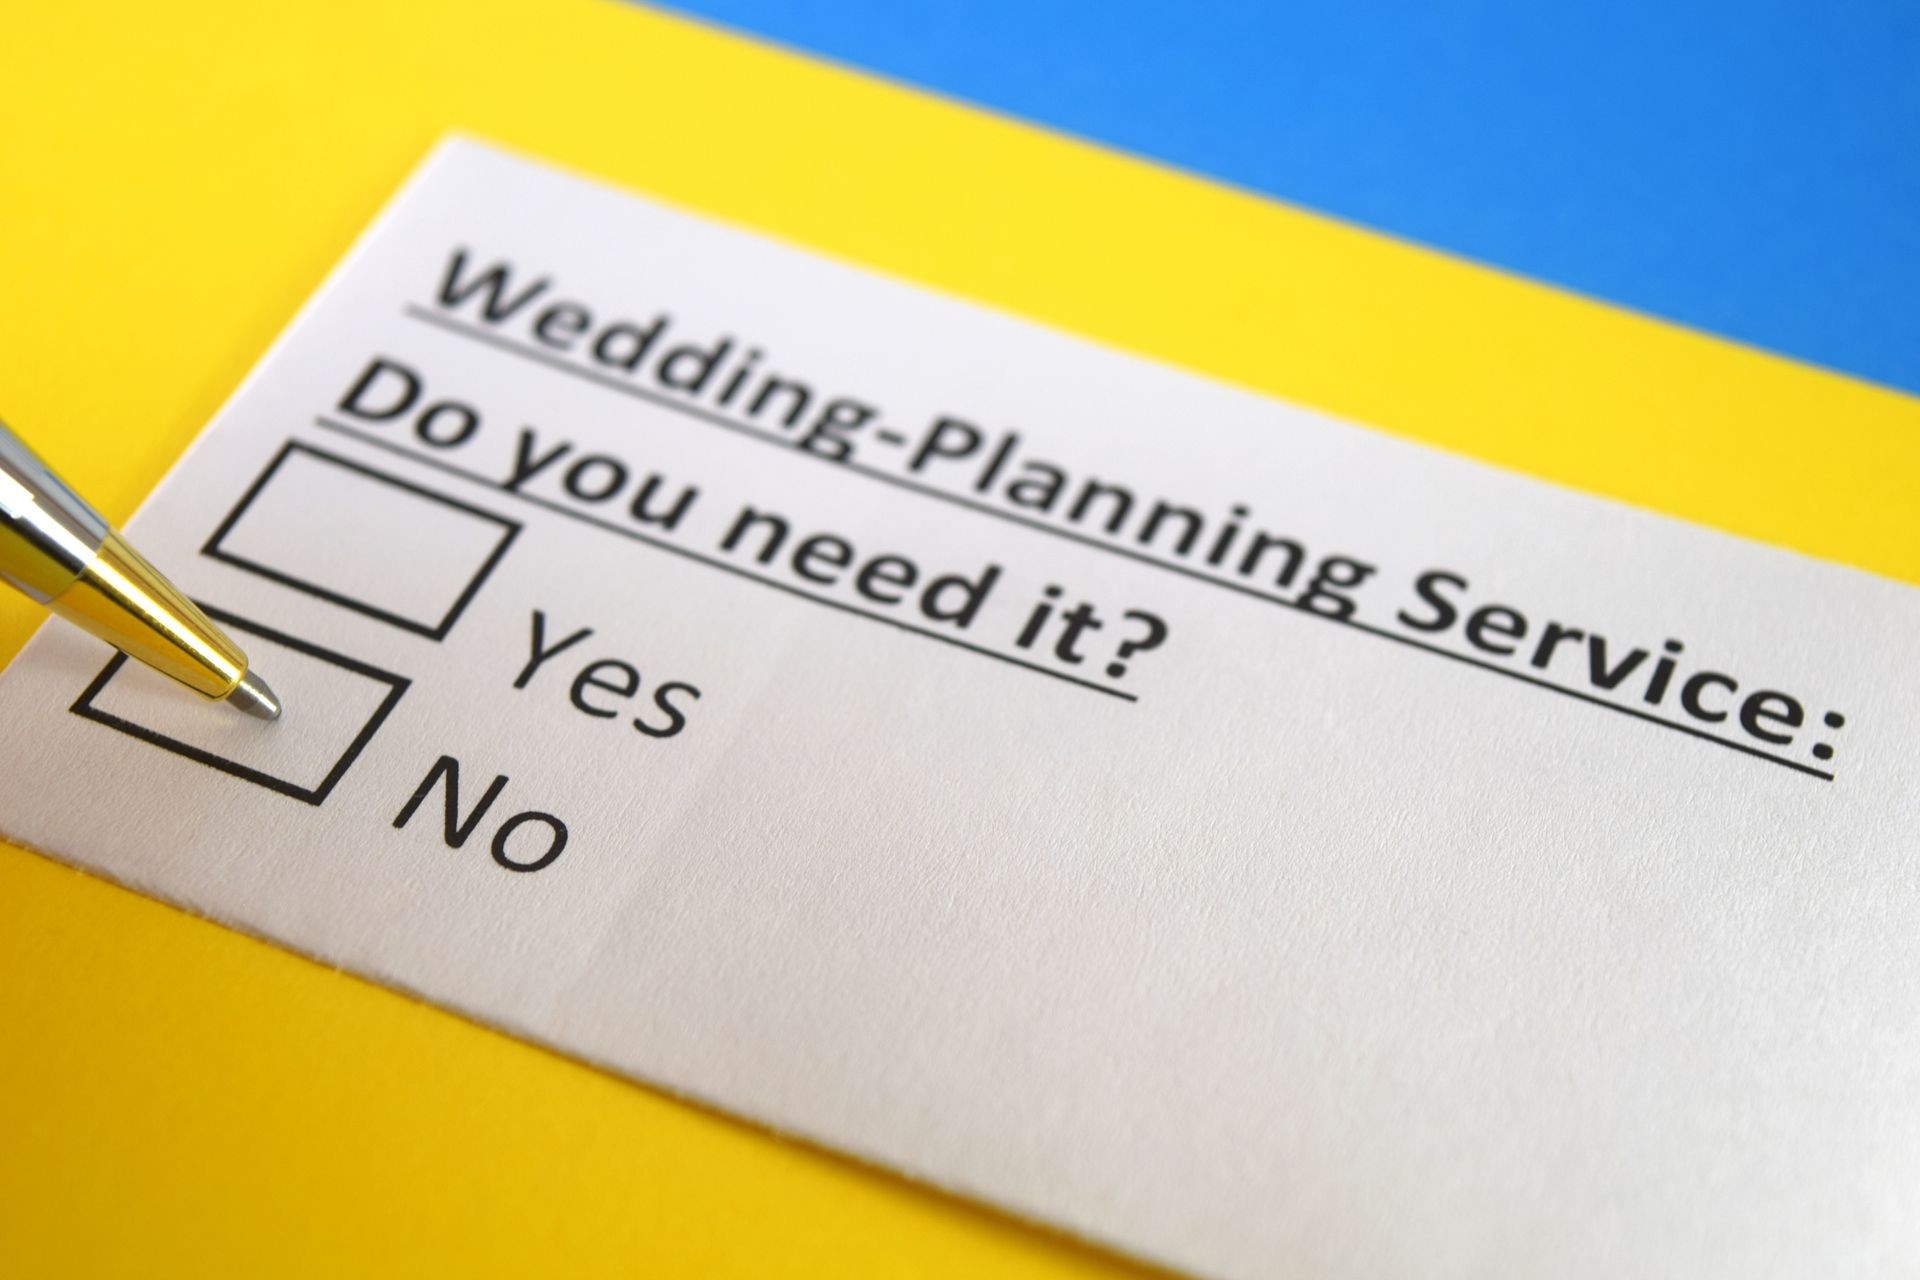 Wedding planning service: Do you need it? yes or no